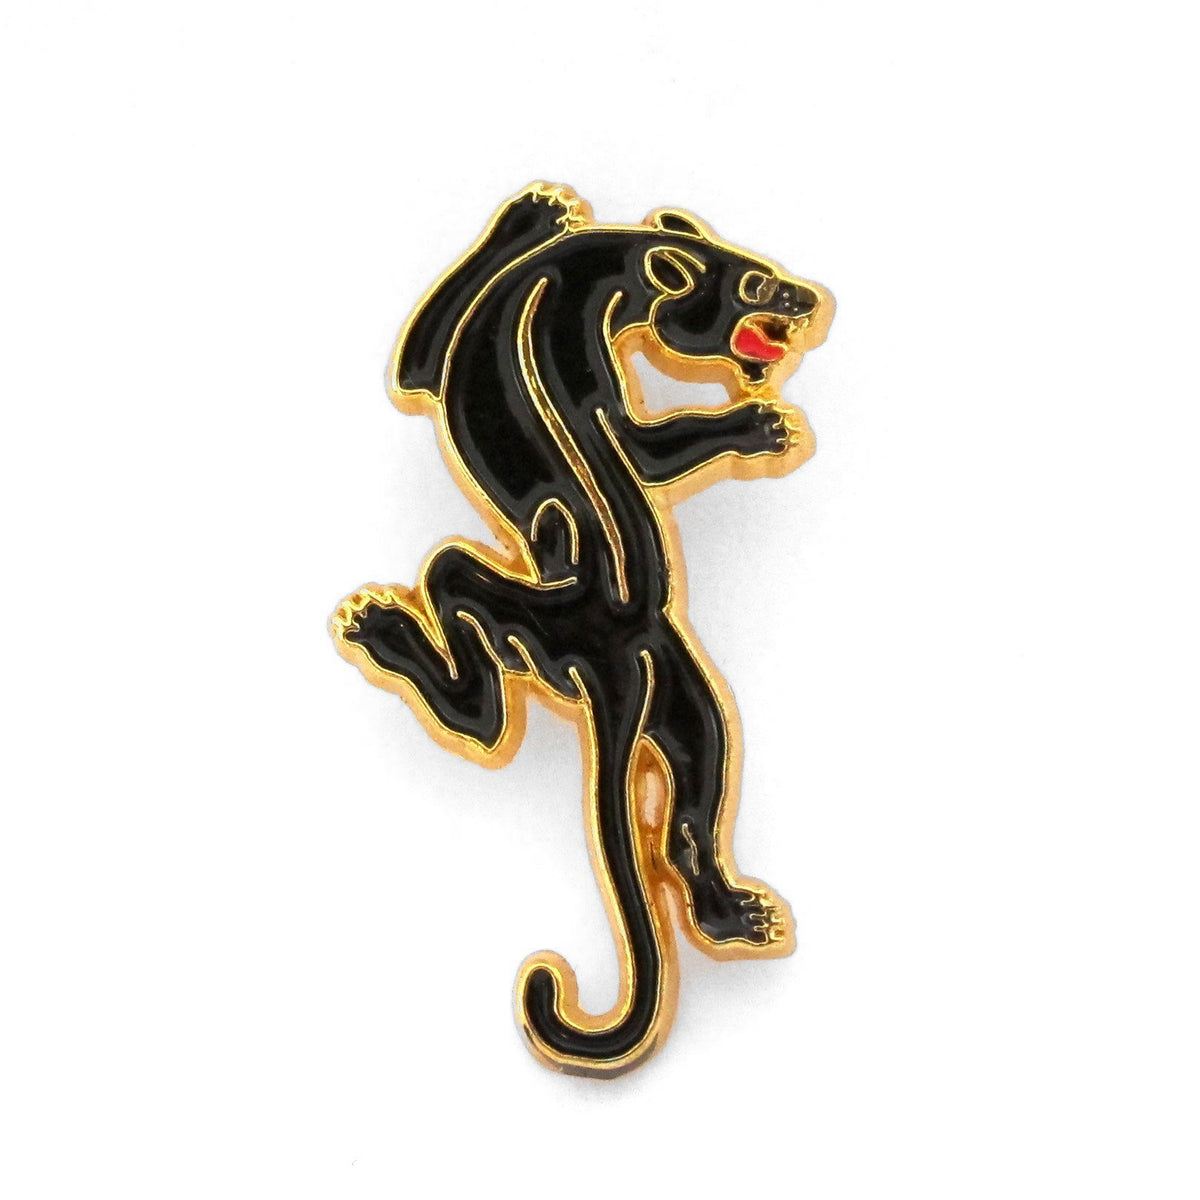 "Black Panther" classic enamel lapel pin. Based off of Sailor Jerry tattoo flash.